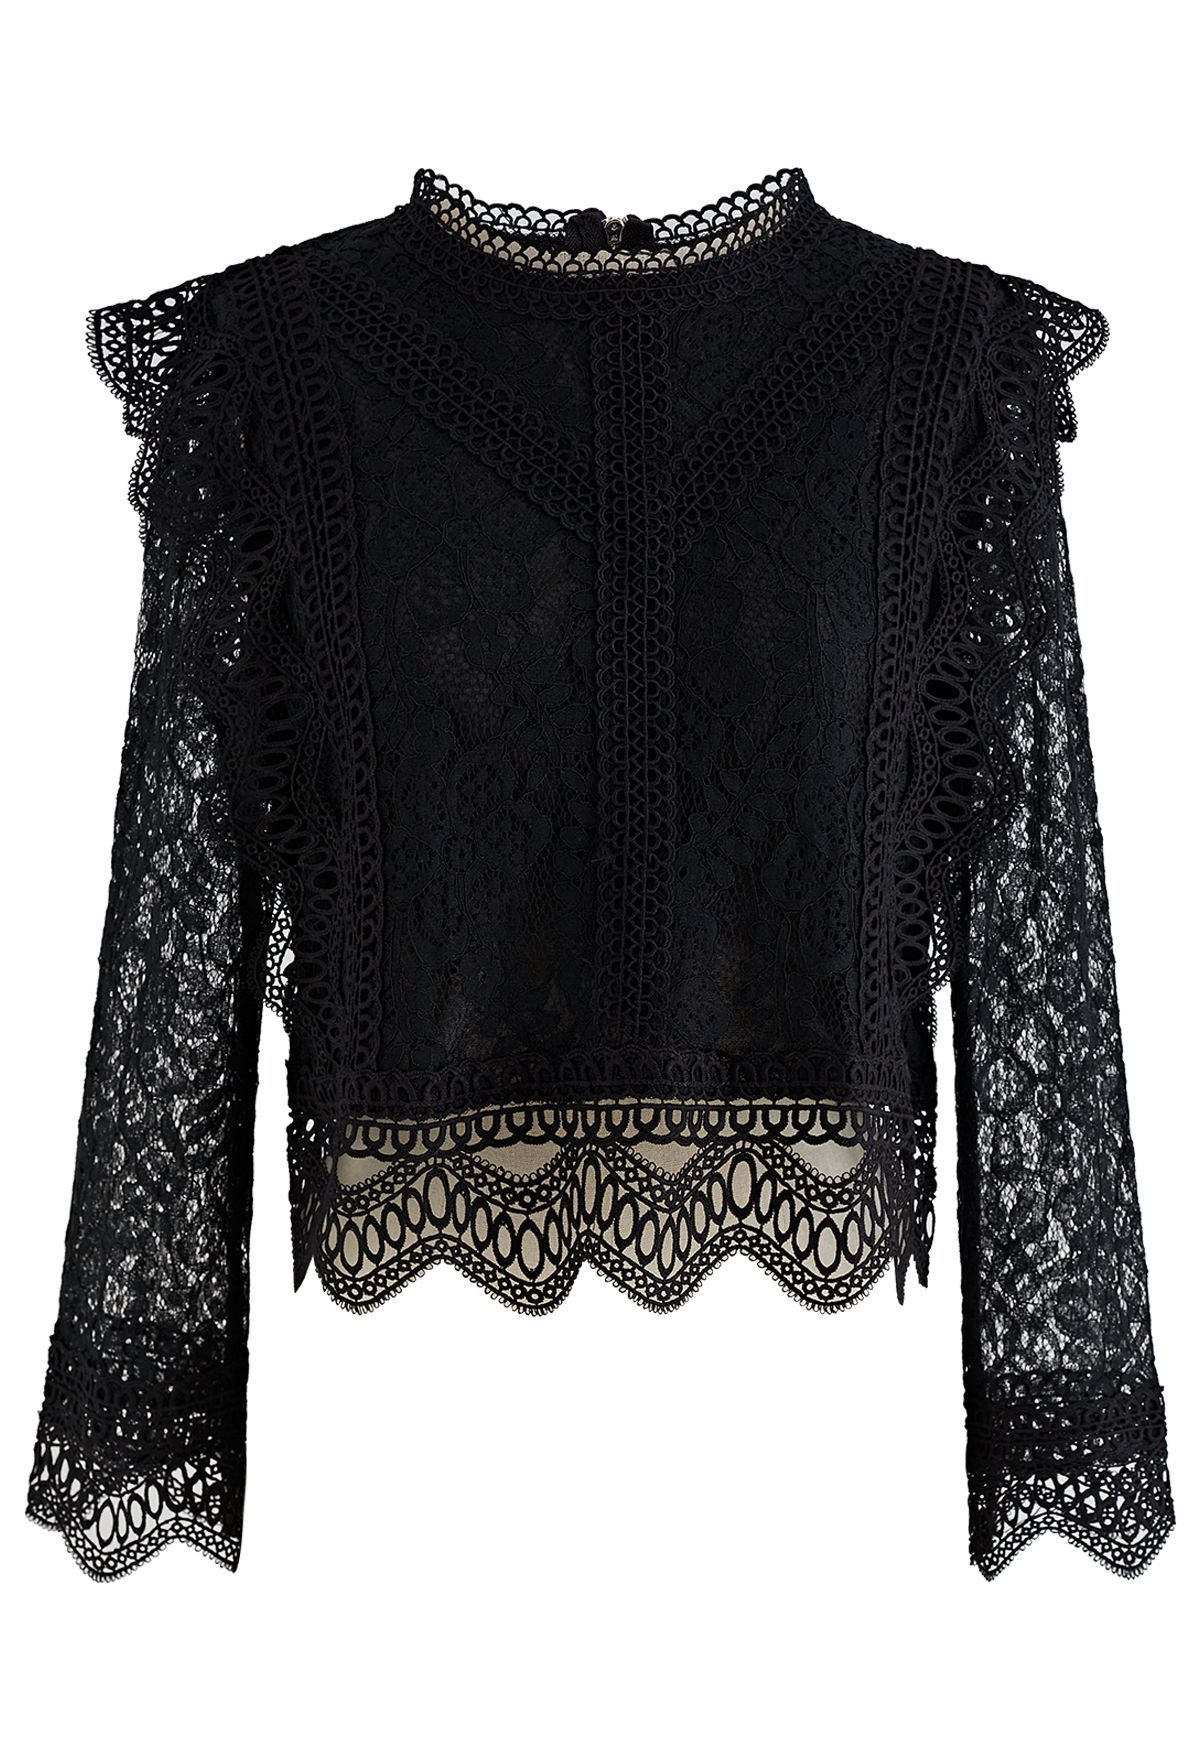 Your Sassy Start Long Sleeve Crochet Lace Top in Black | Chicwish